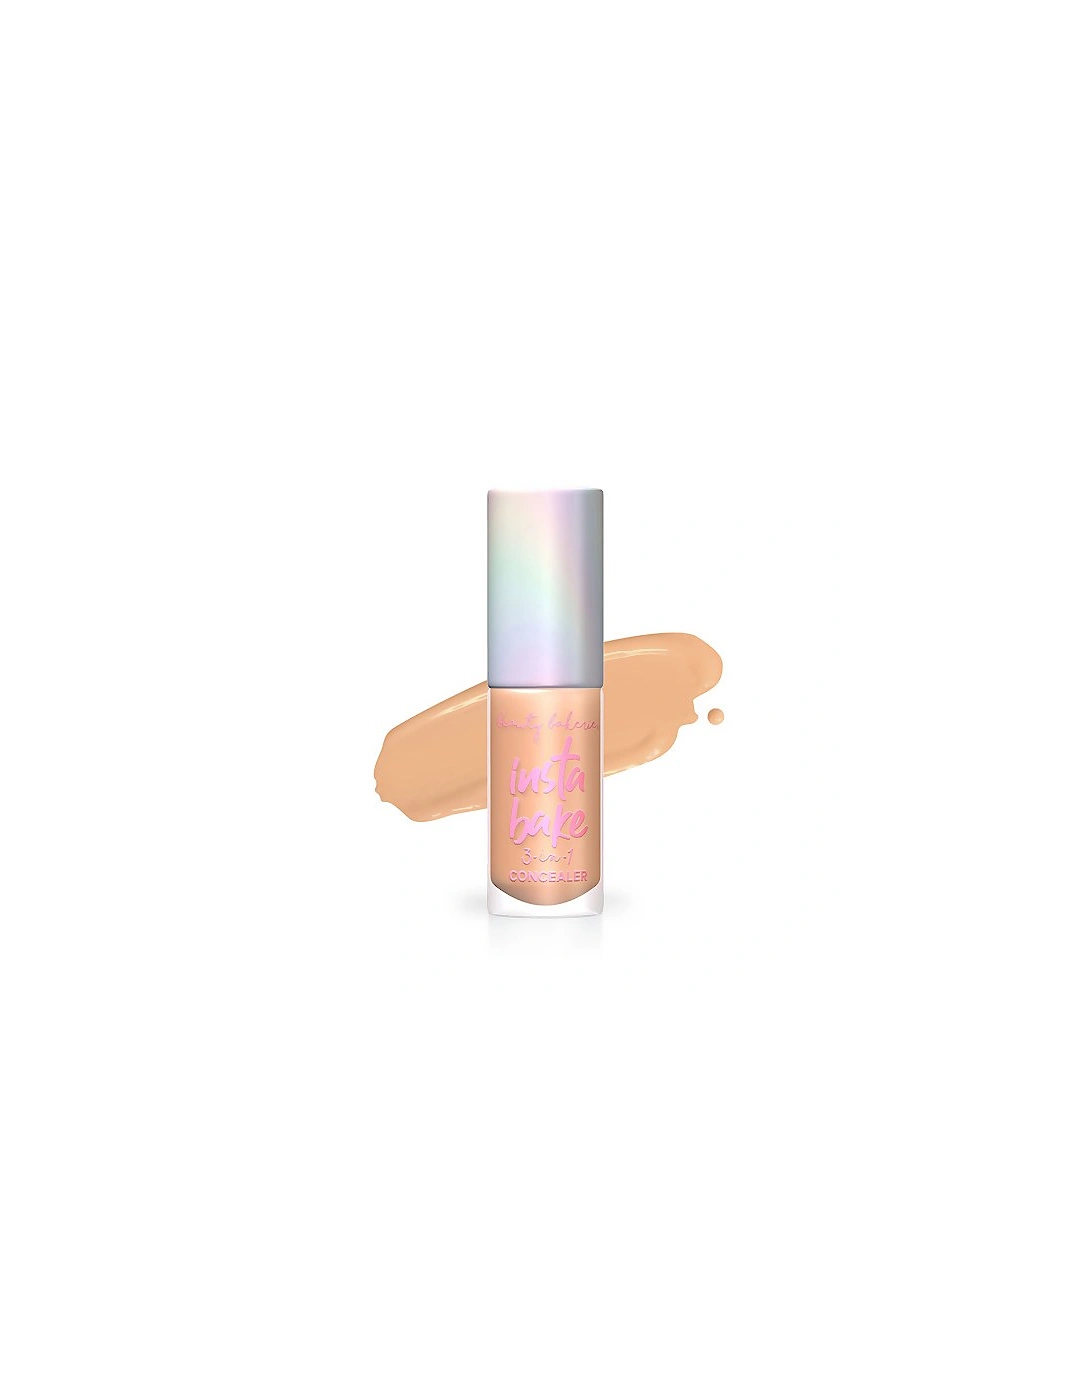 InstaBake 3-in-1 Hydrating Concealer - 001 Phun Intended